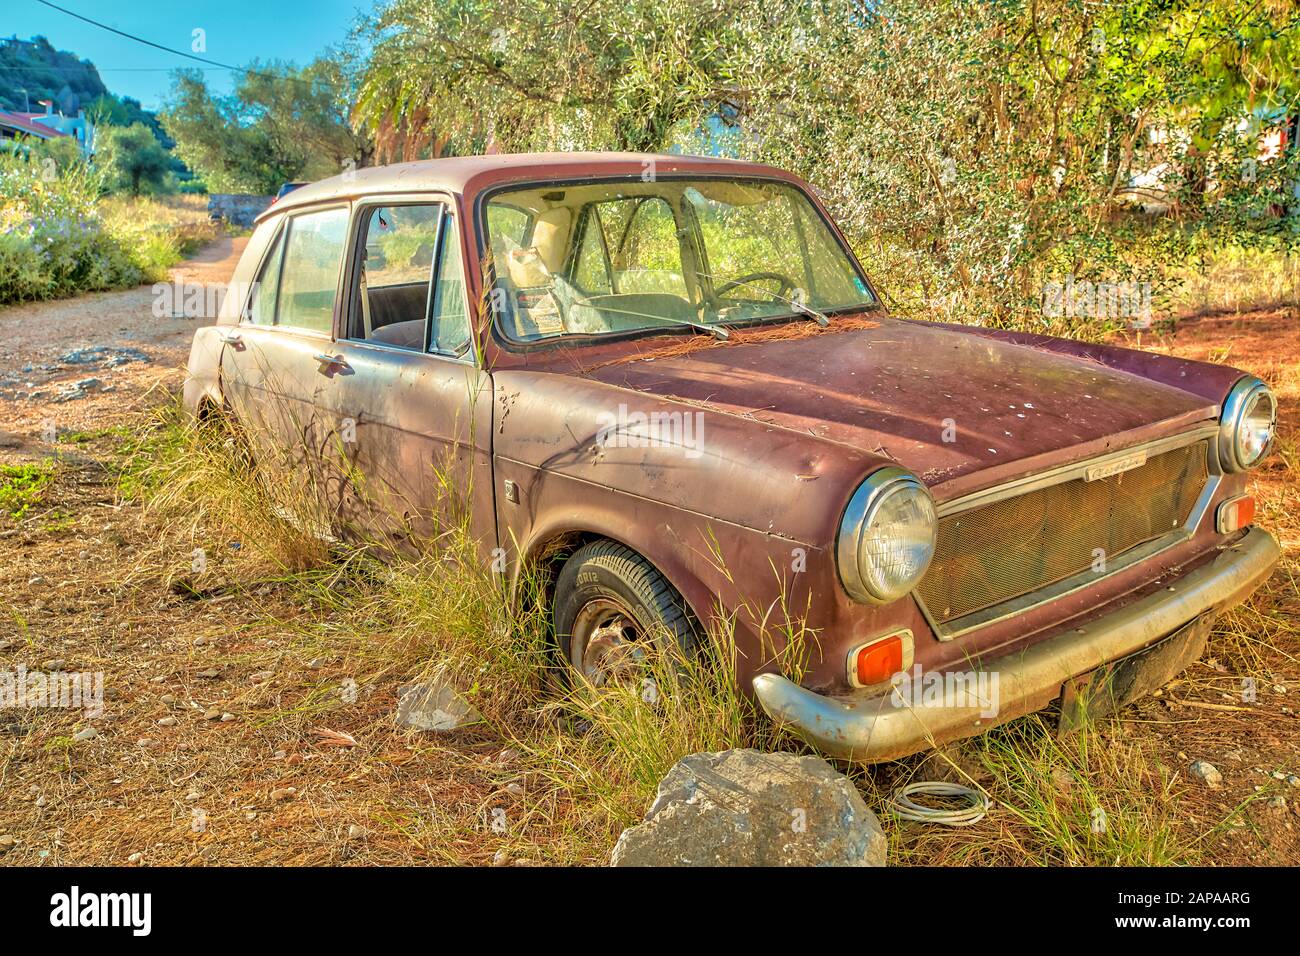 Nafplio, Peloponnese, Greece - August 29, 2015: 1970s wreck of car Austin 1300 MkIII. Made by the historical Austin Motor Company Limited, British Stock Photo